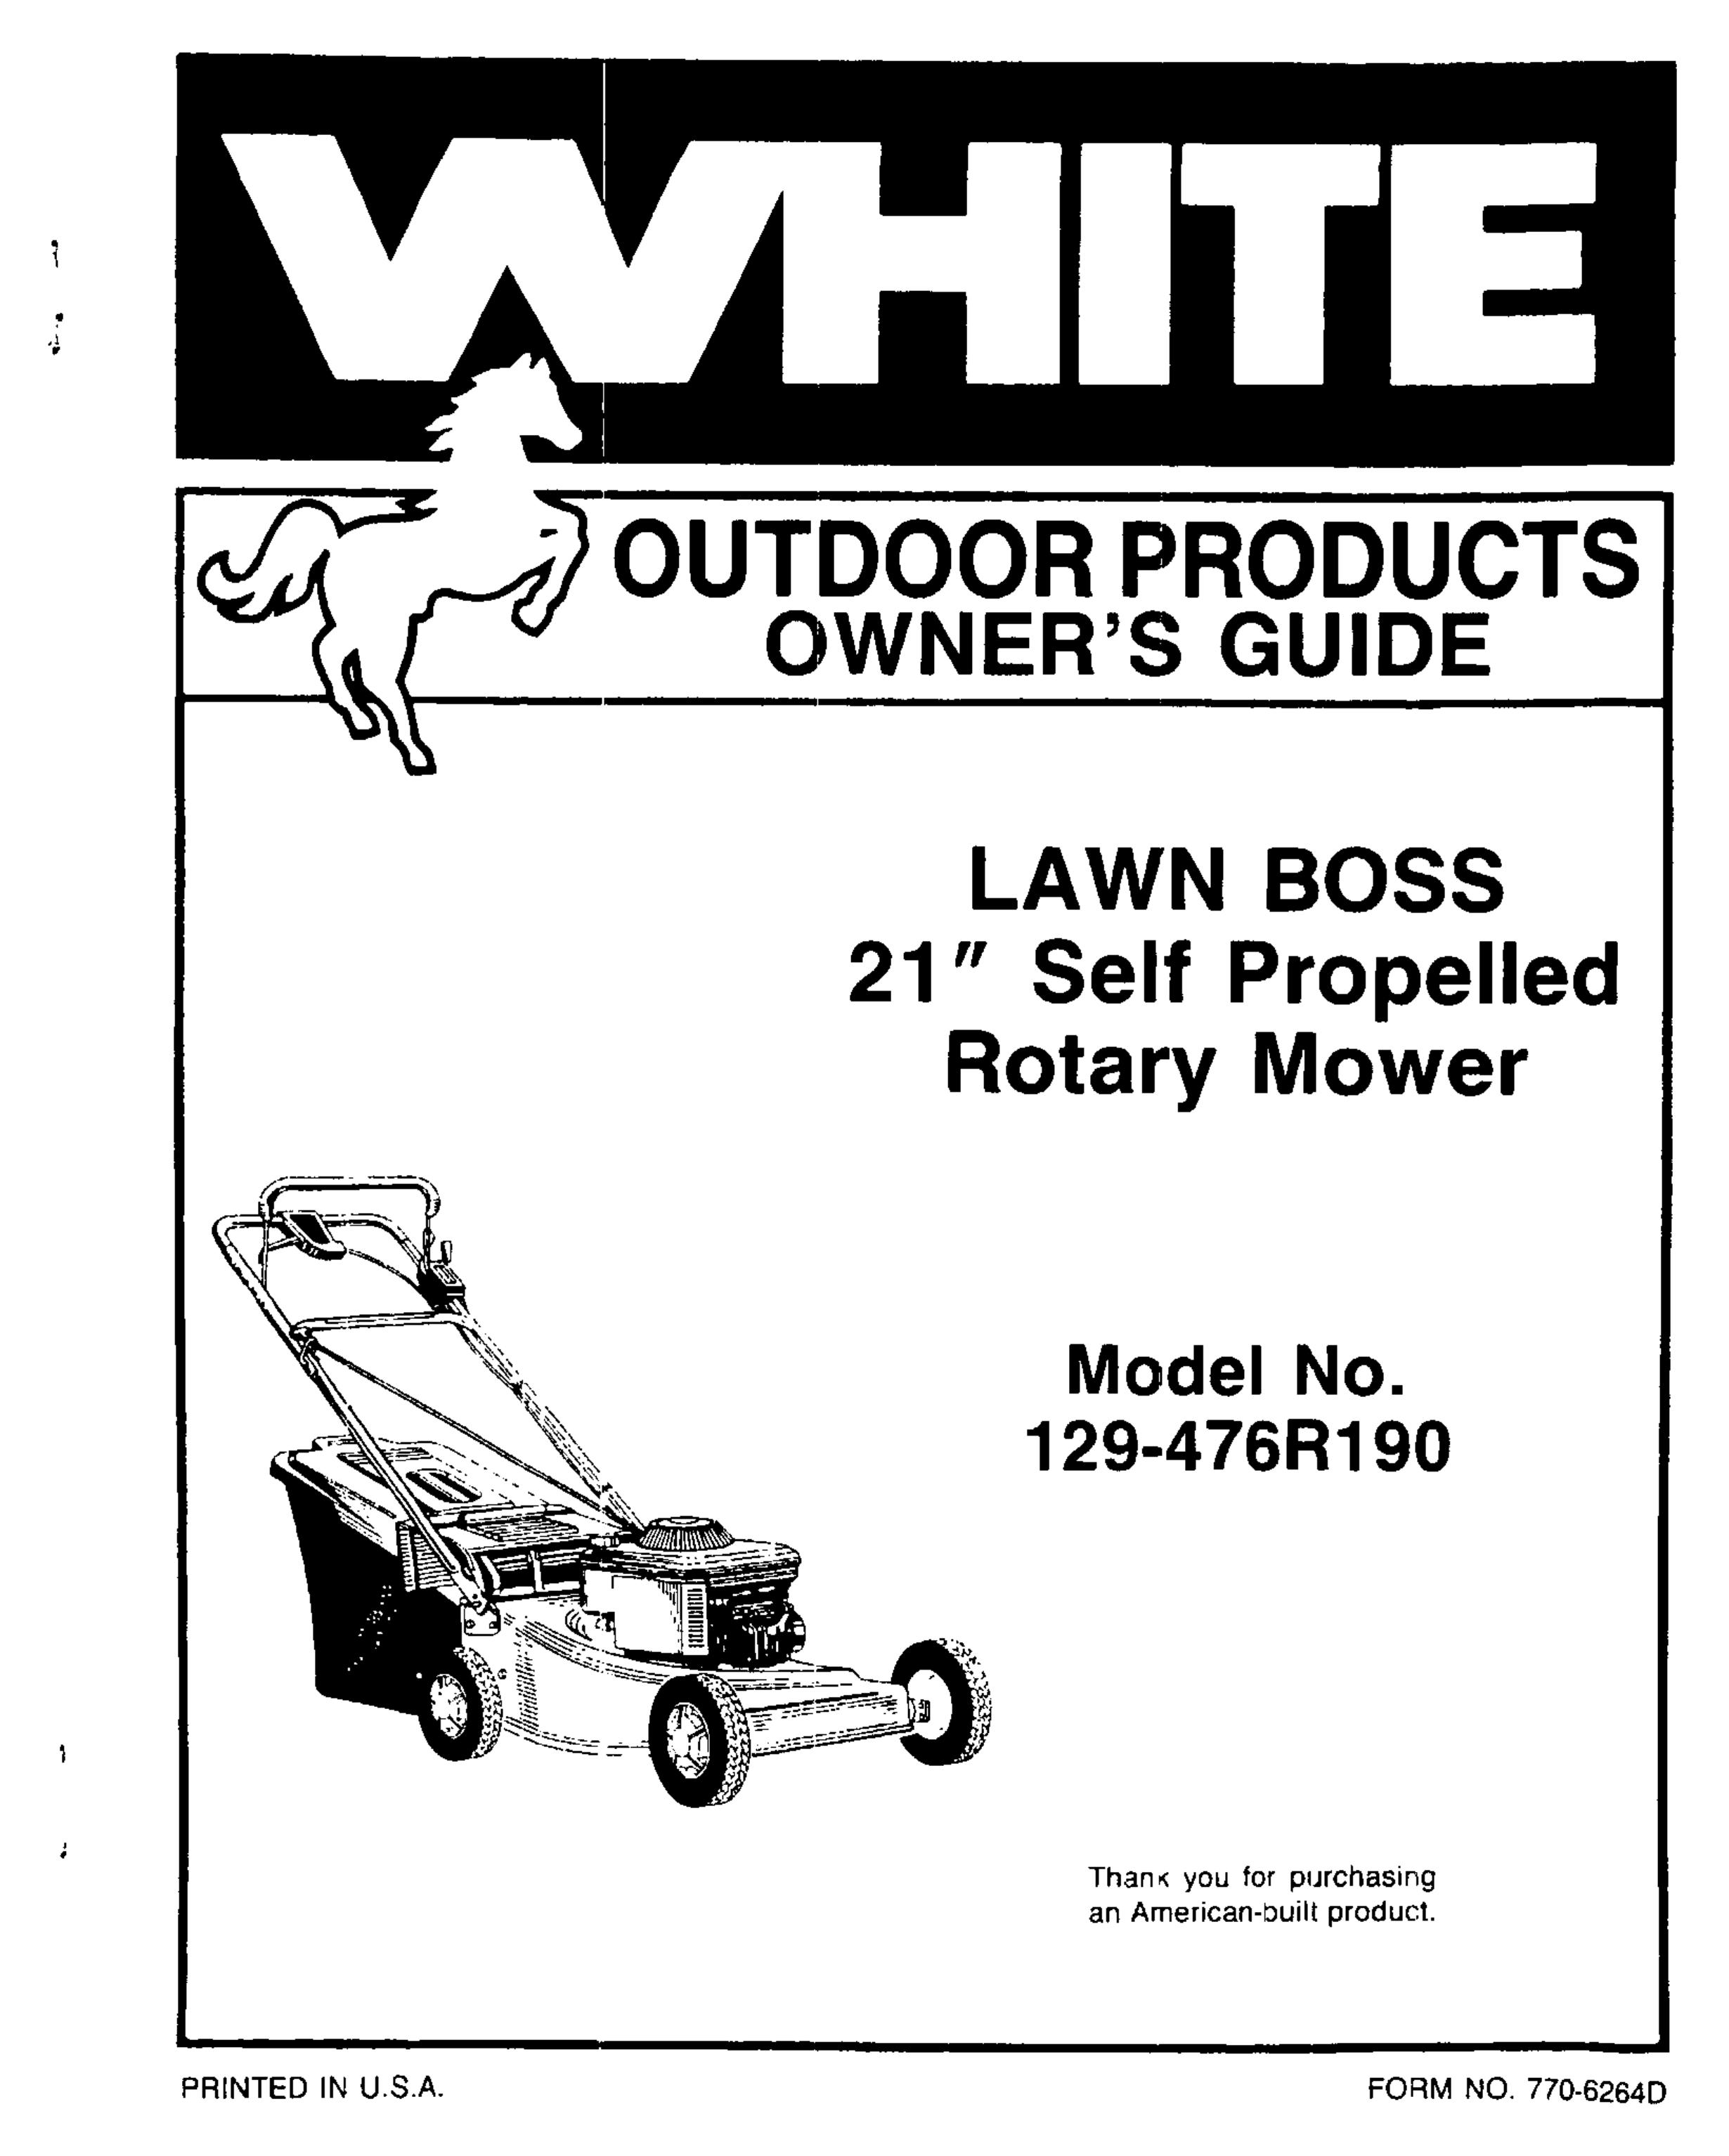 White Outdoor 129-476R190 Lawn Mower User Manual